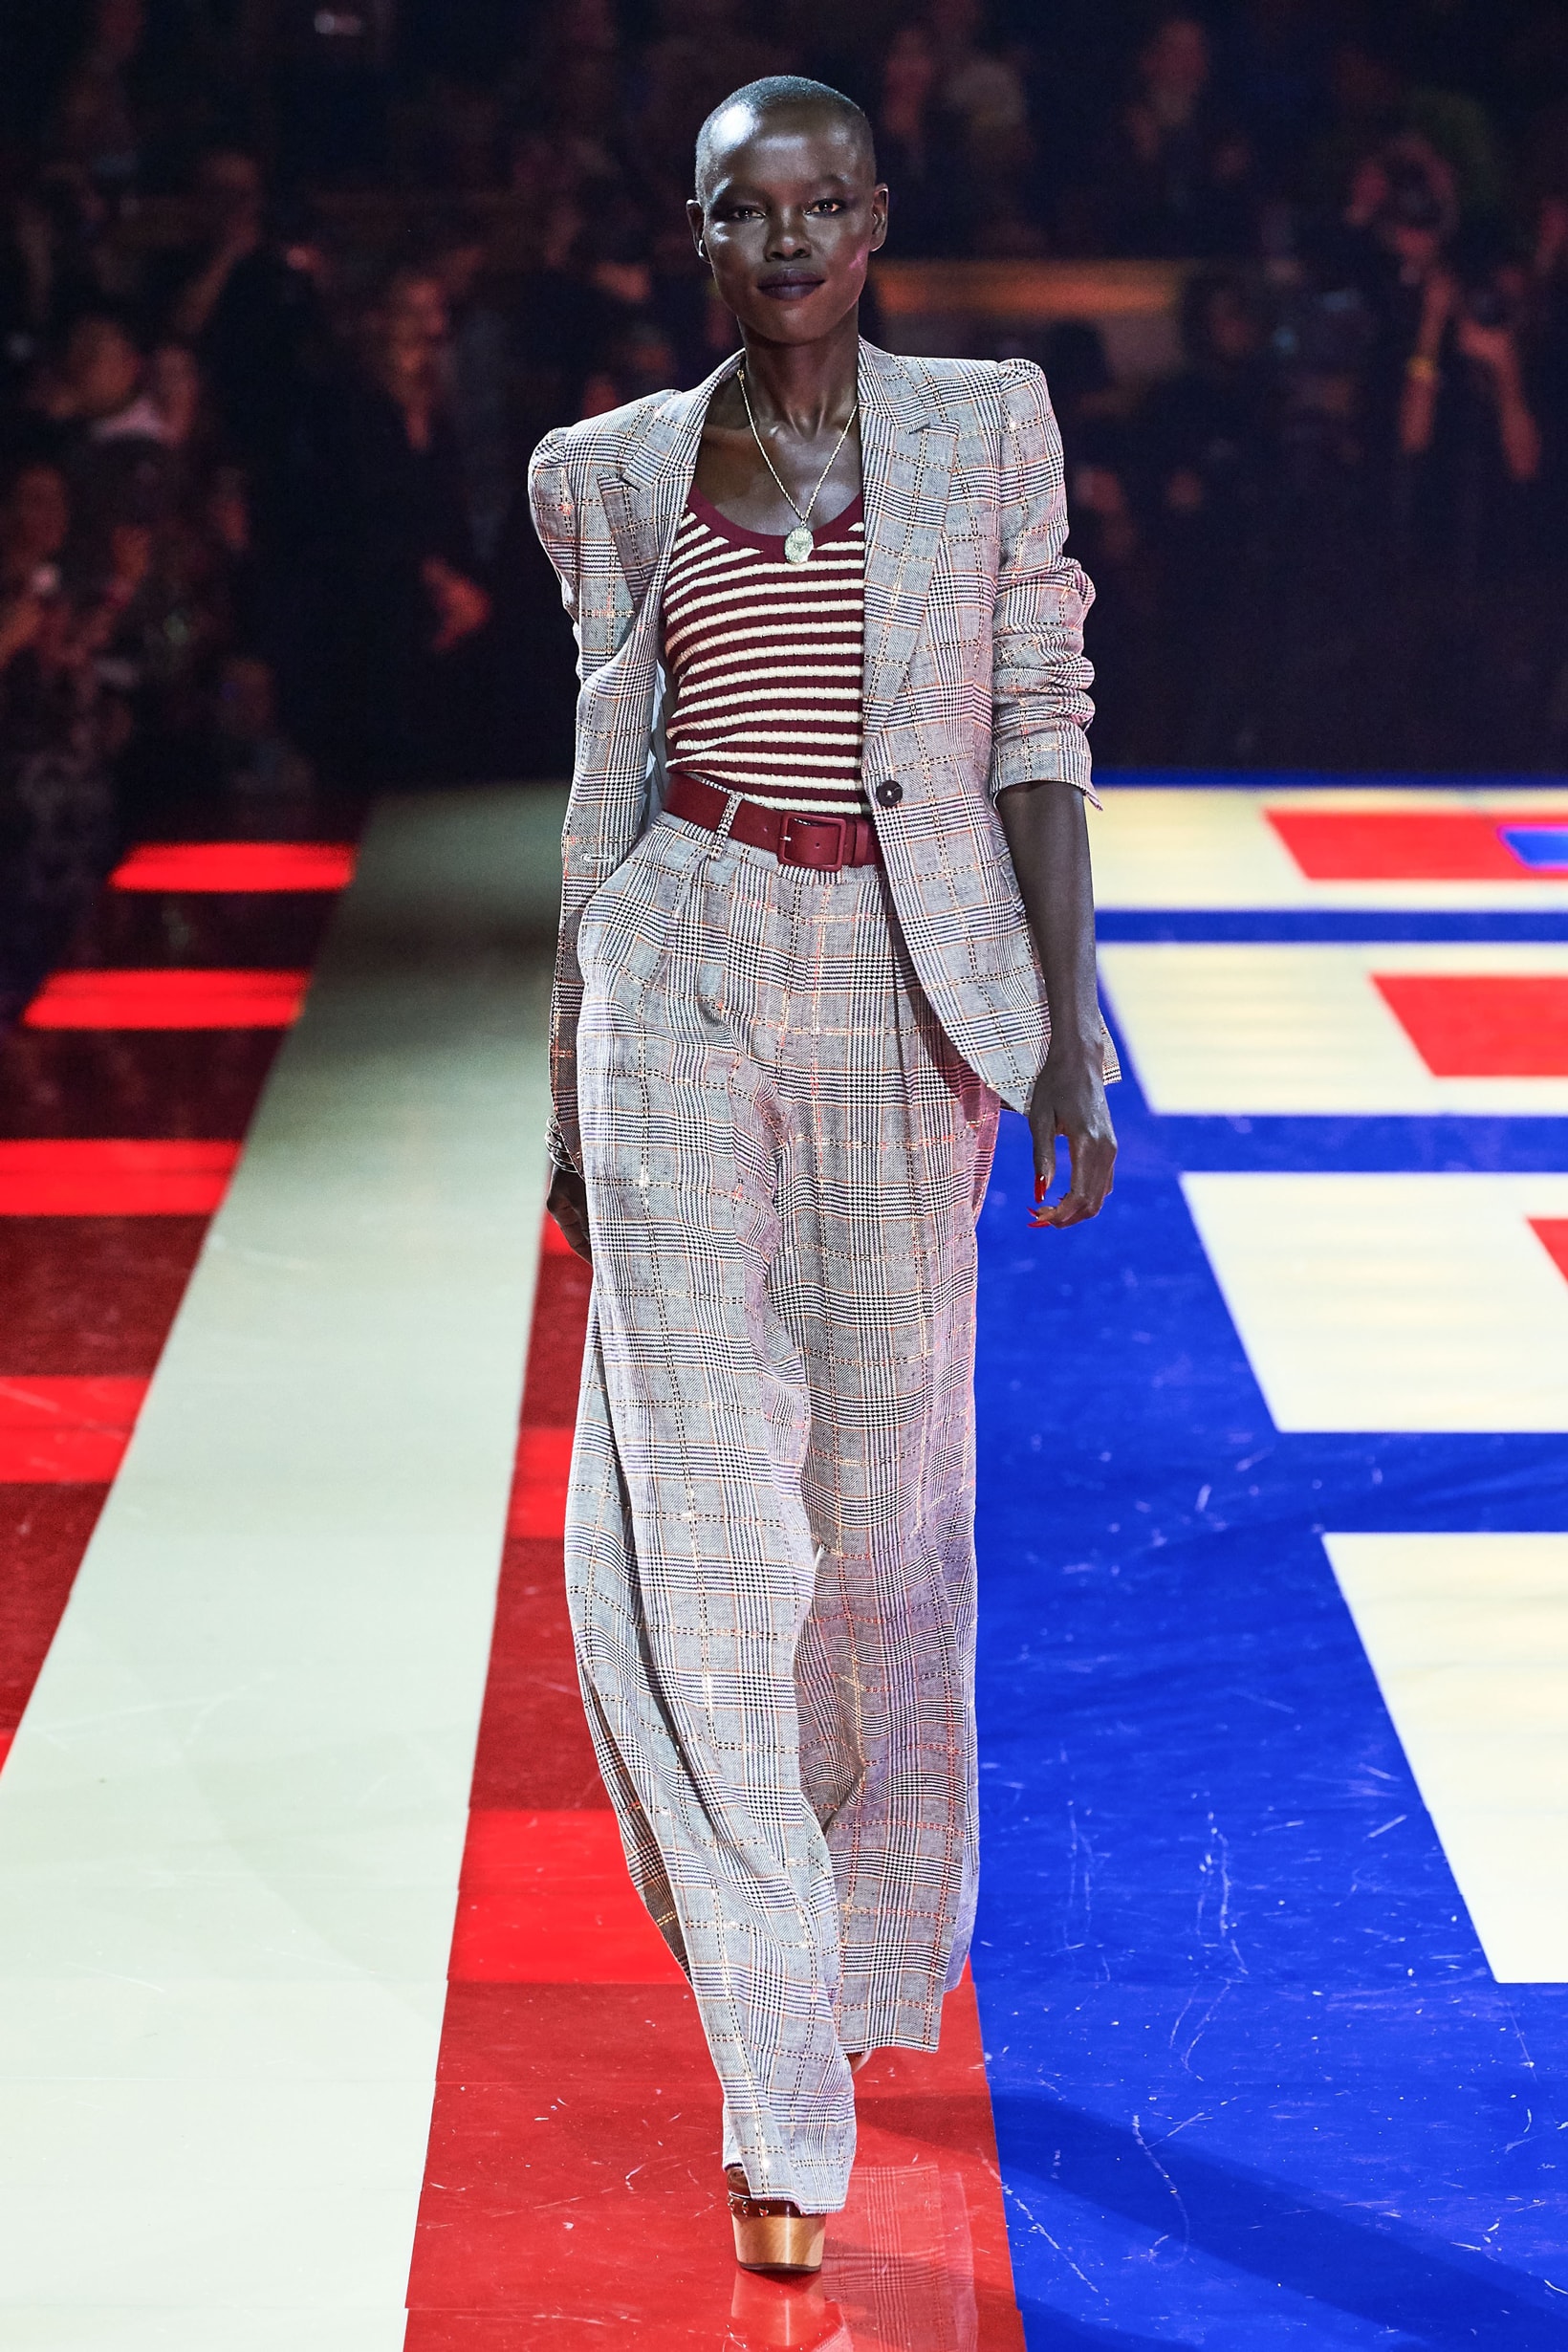 Tommy Hilfiger TommyNow Zendaya Spring 2019 Paris Fashion Week Show Collection Grace Bol Suit Grey